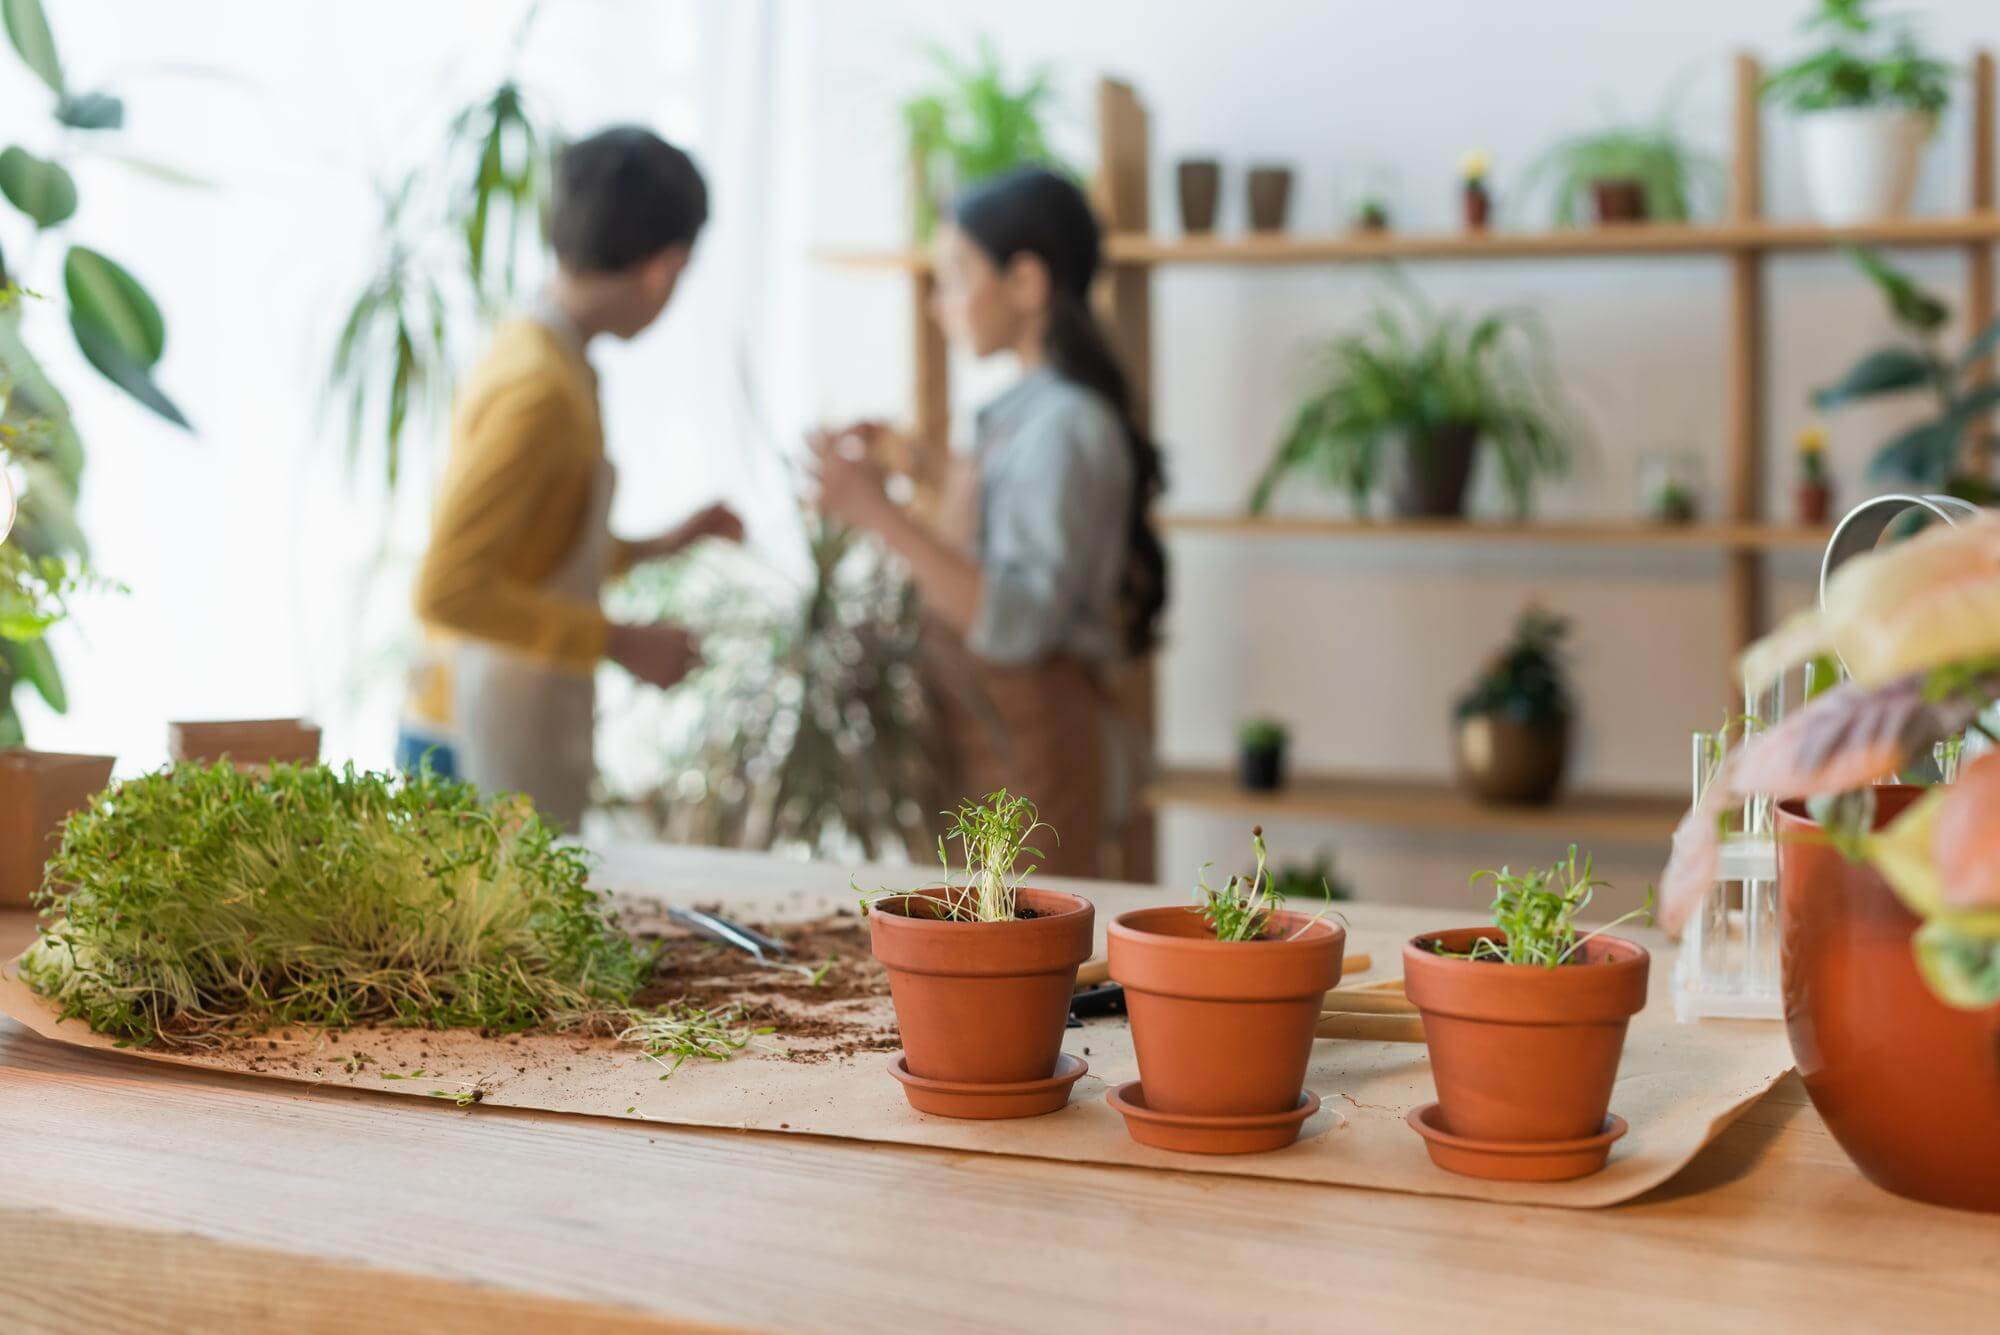 Gardening with Kids: Engaging Children in Plant Care and Growth